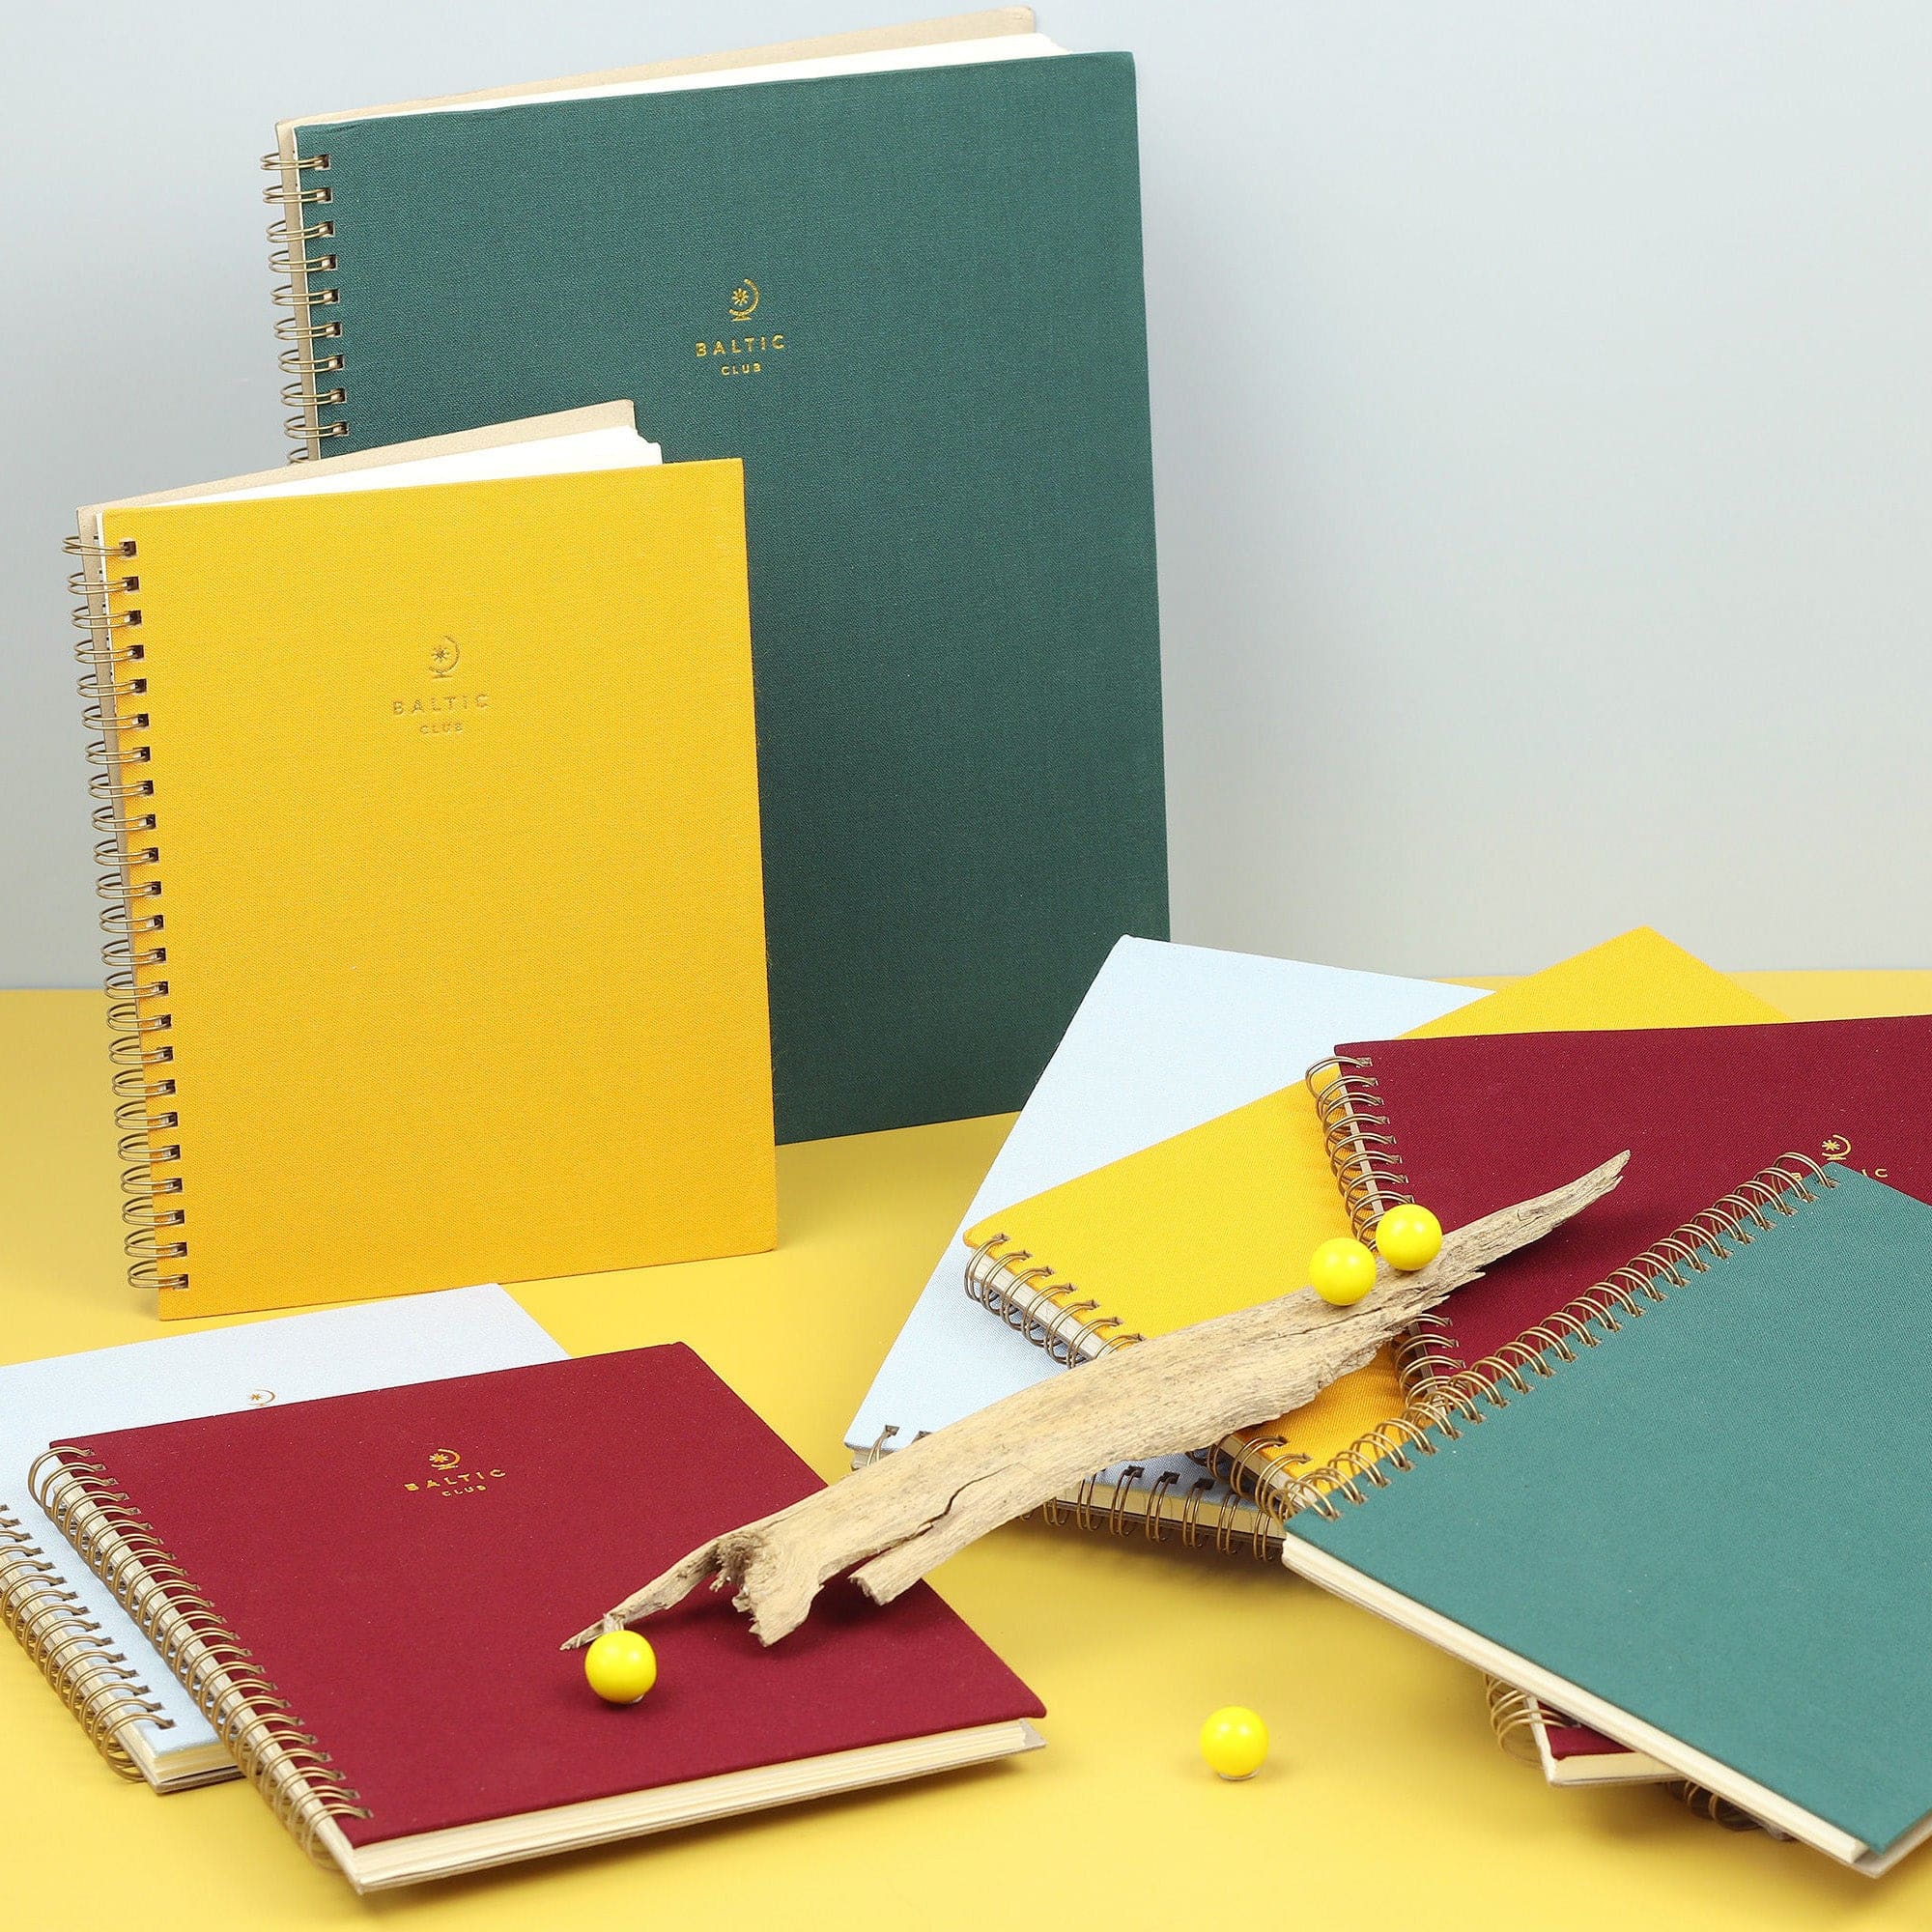 Curry Cloth Large Spiral Notebook | The Baltic Club